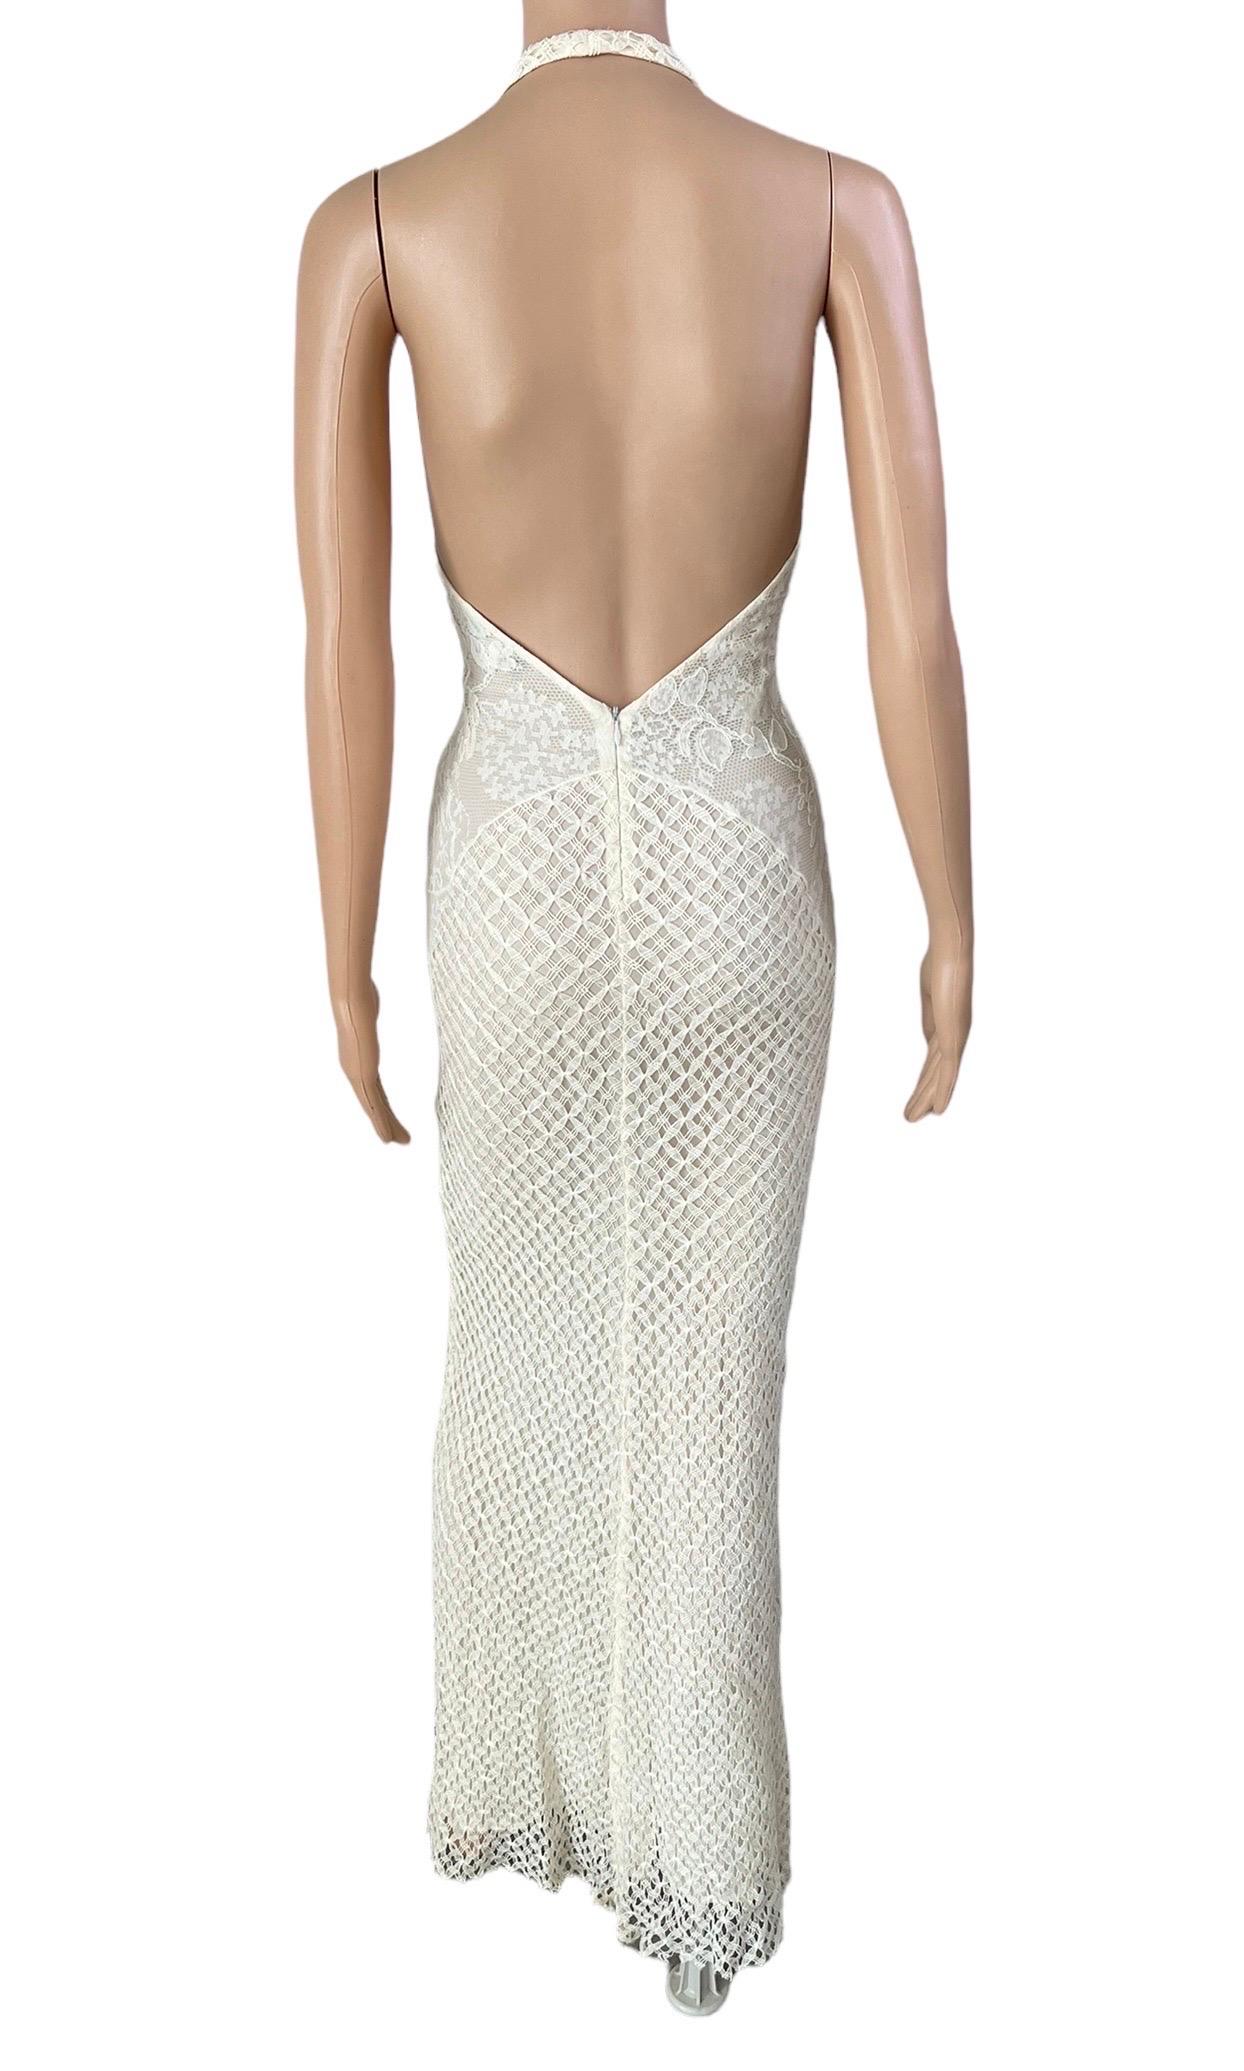 Women's or Men's Gianni Versace S/S 2002 Plunging Backless Semi Sheer Lace Knit Ivory Dress Gown